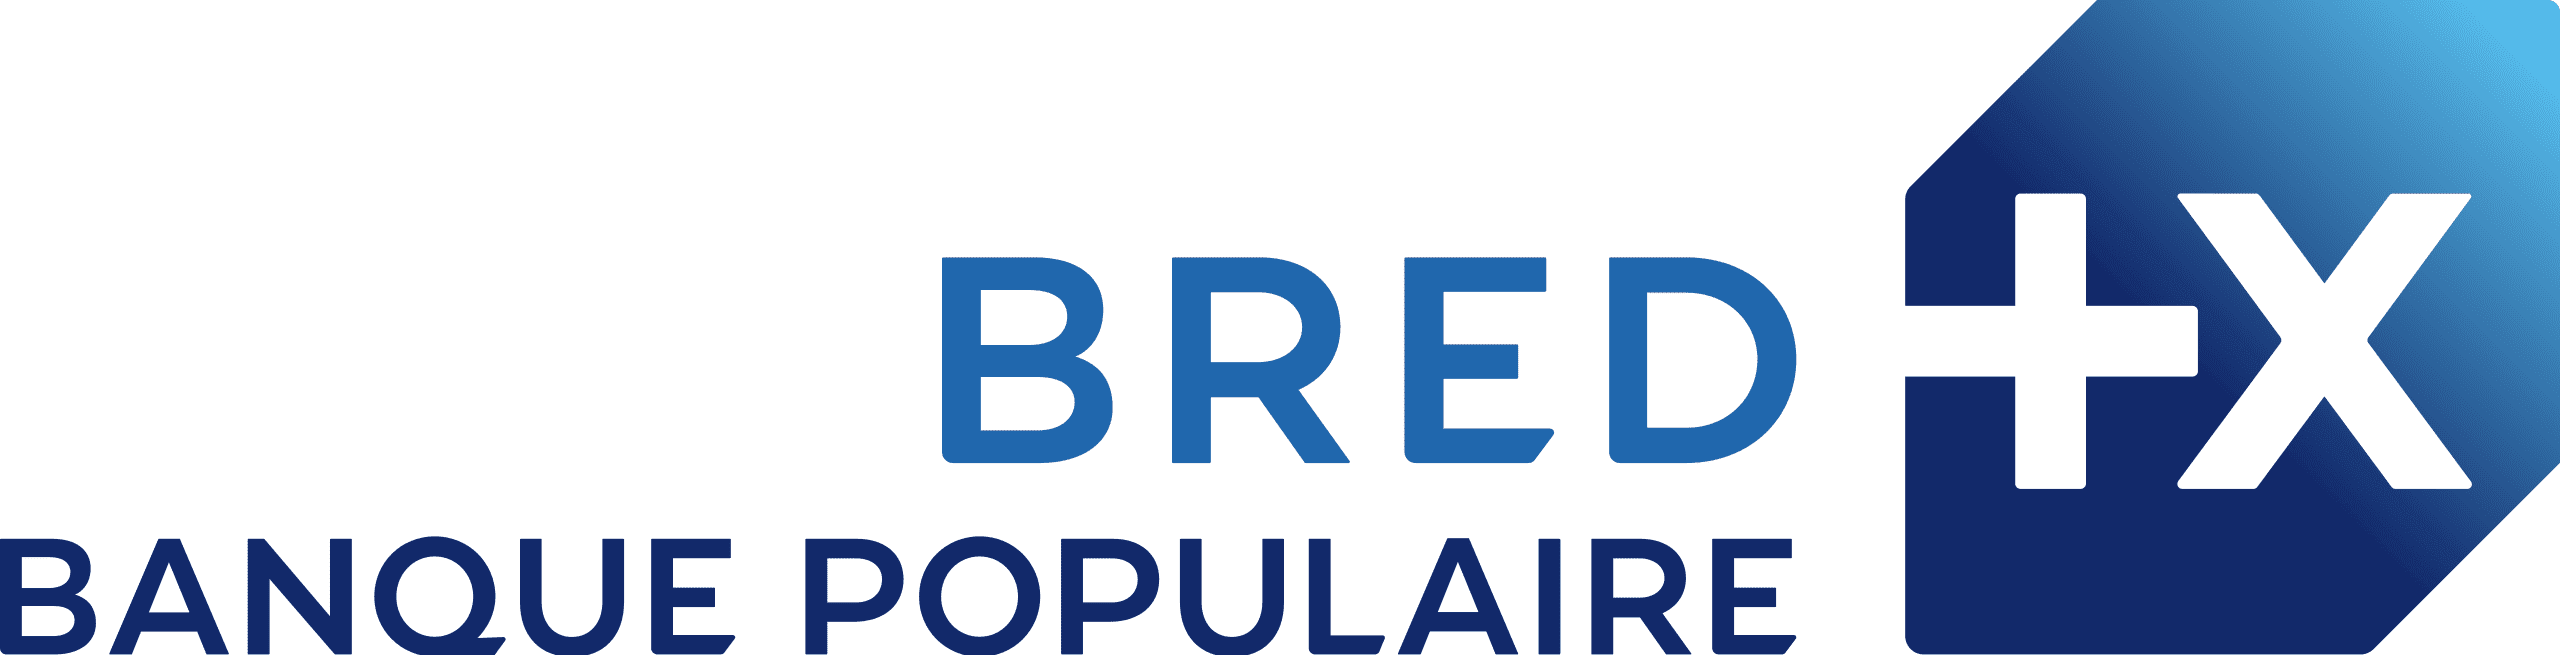 2560px-Logo_BRED_Banque_Populaire_2018.svg